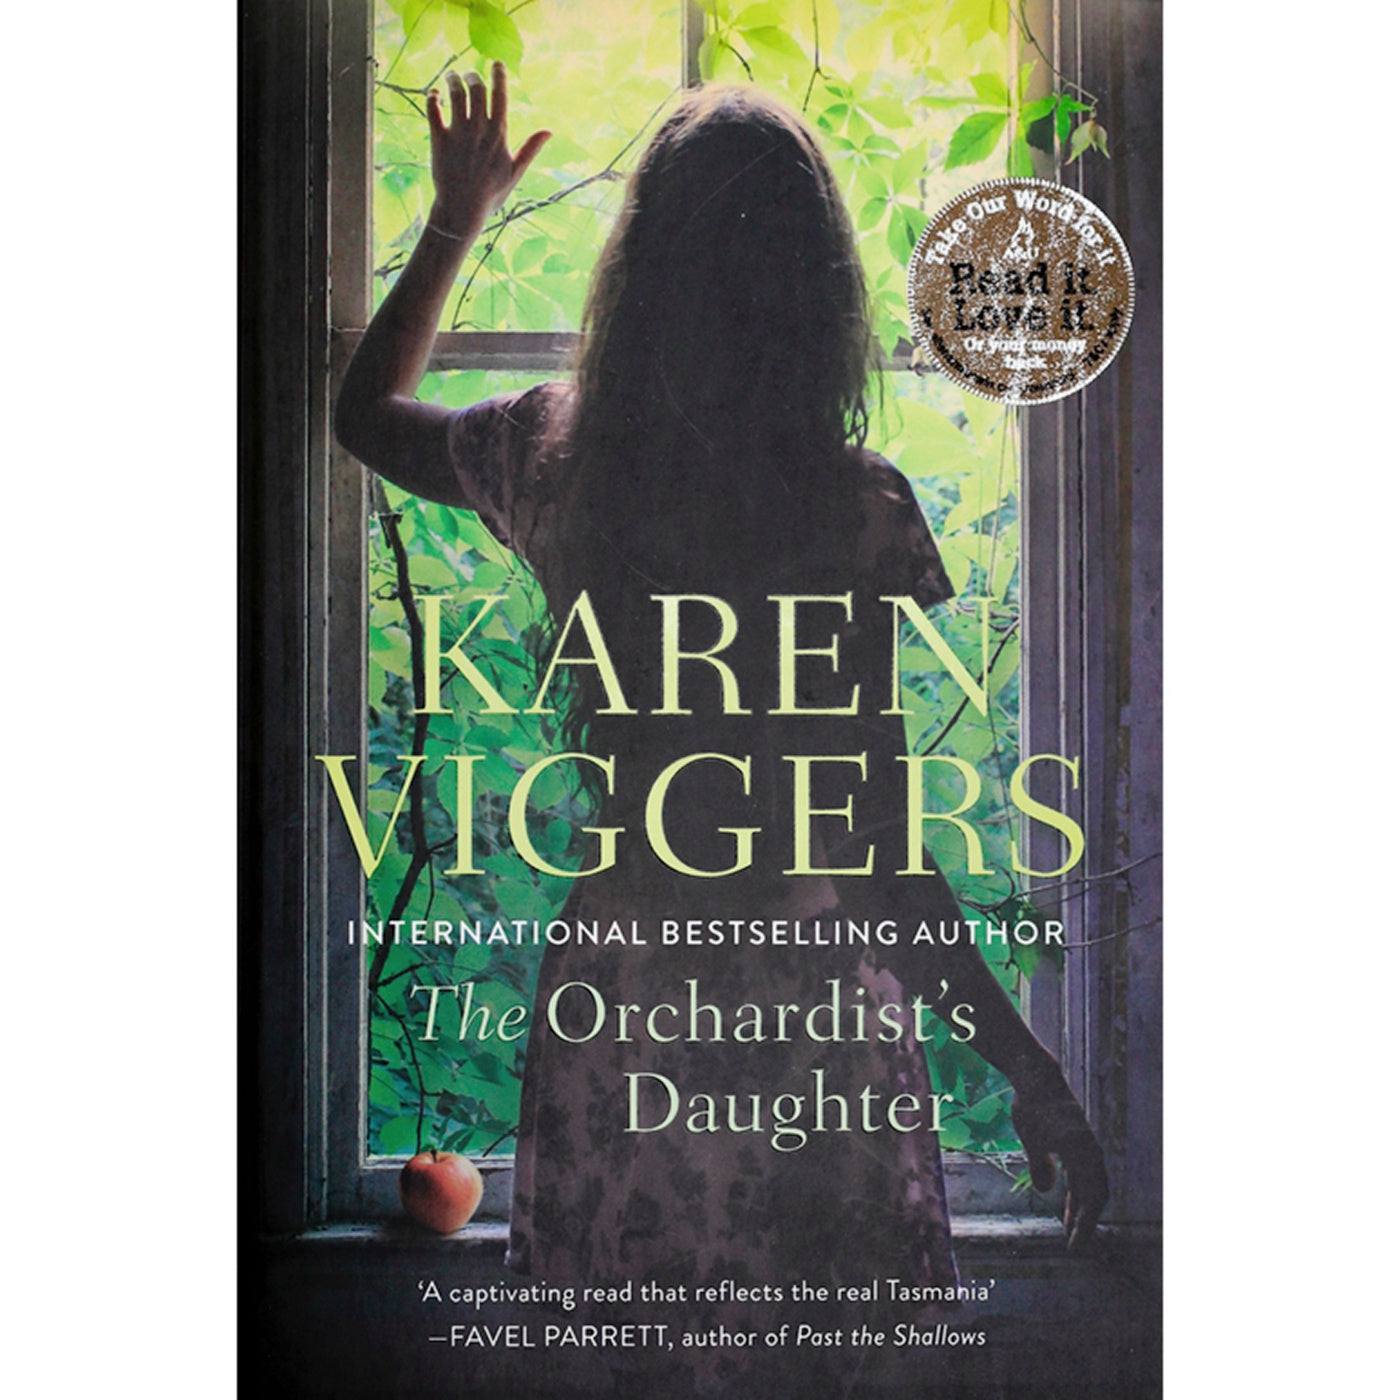 The Orchardist's Daughter